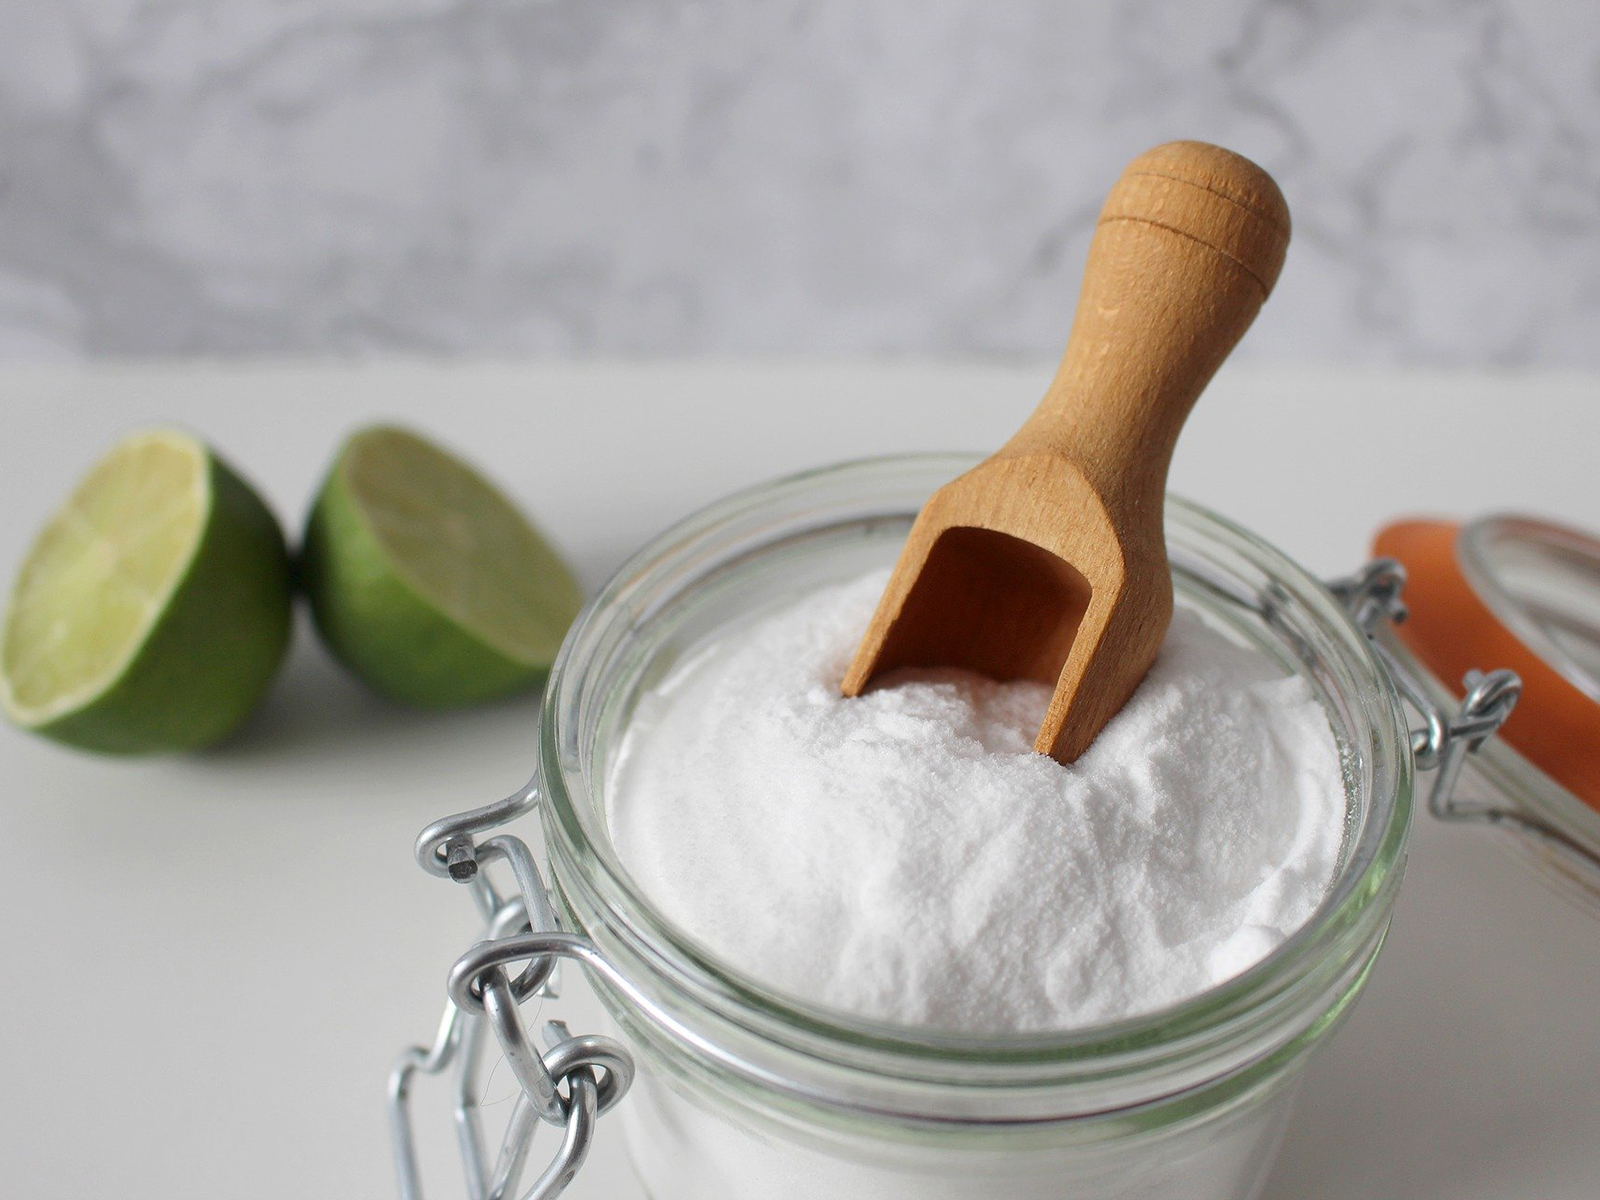 Is it ok to brush your teeth with baking soda?